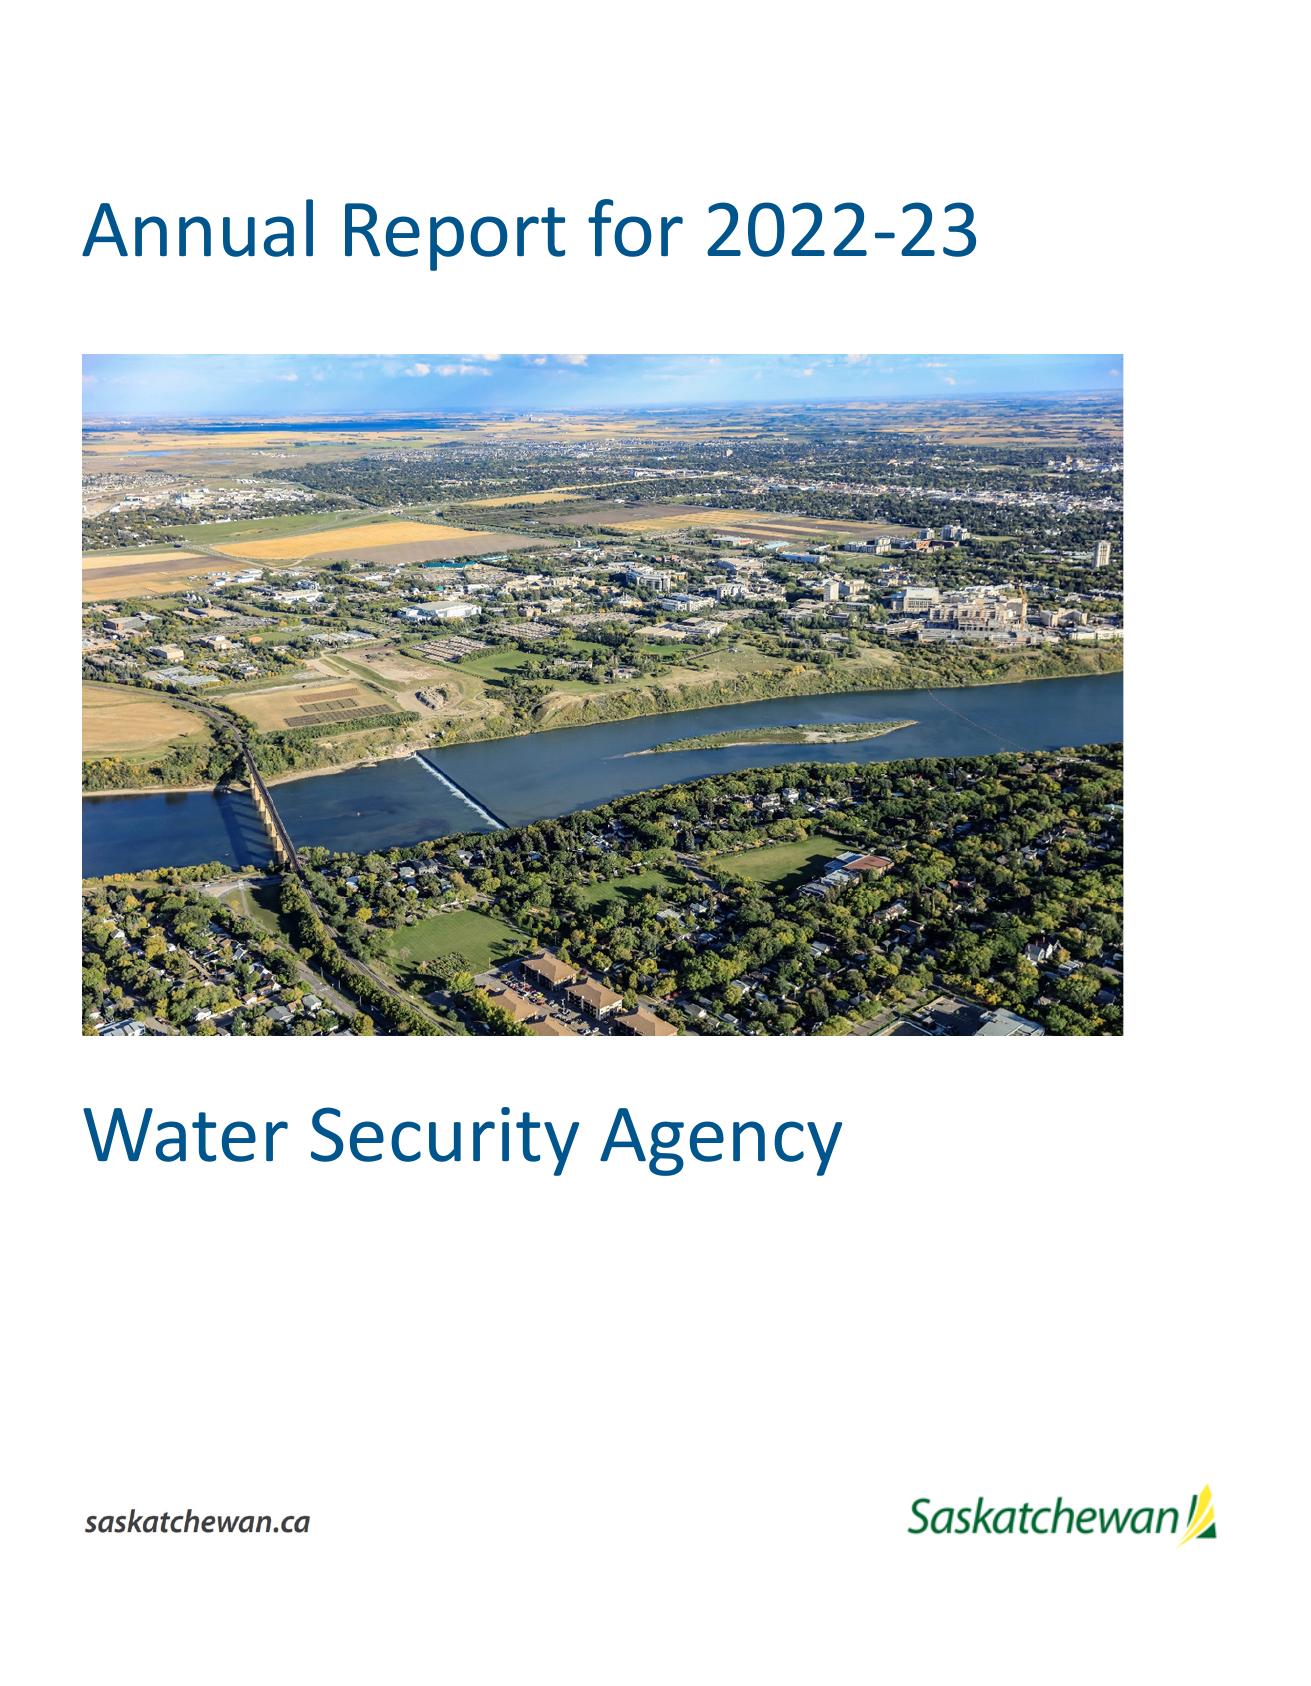 OURWATERSHED 2023 Annual Report